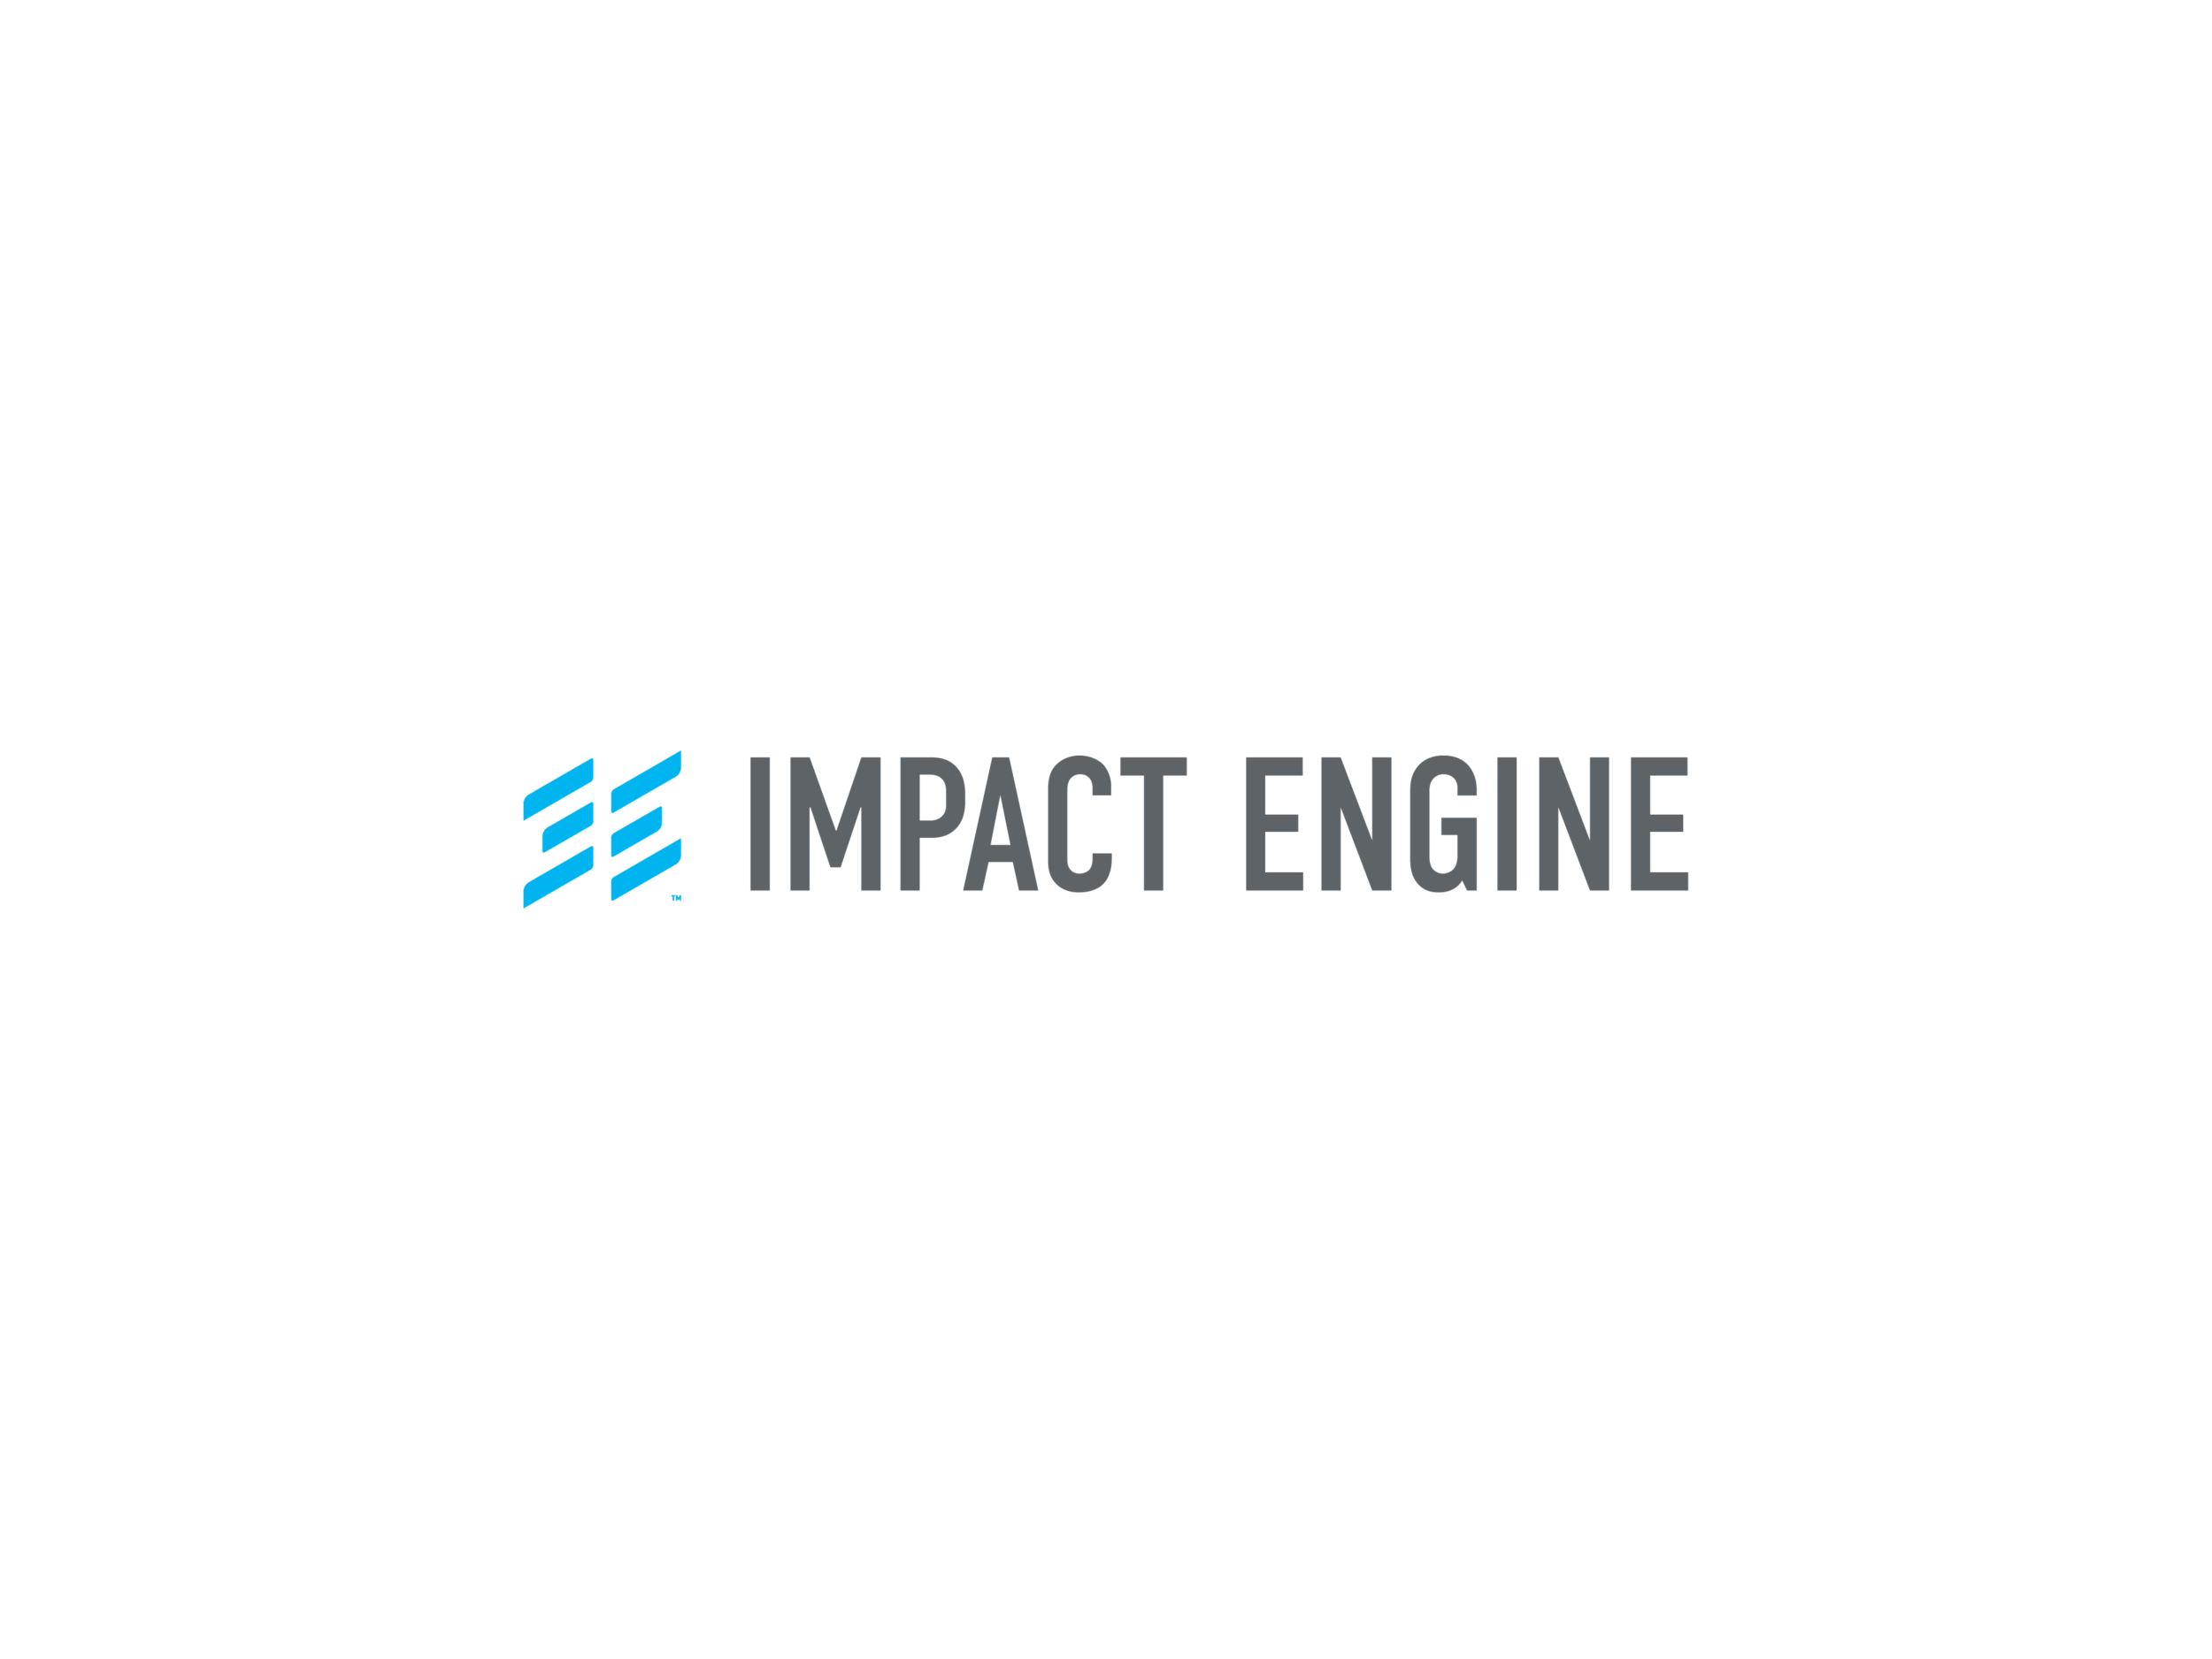 Impact Engine-750px-01.png